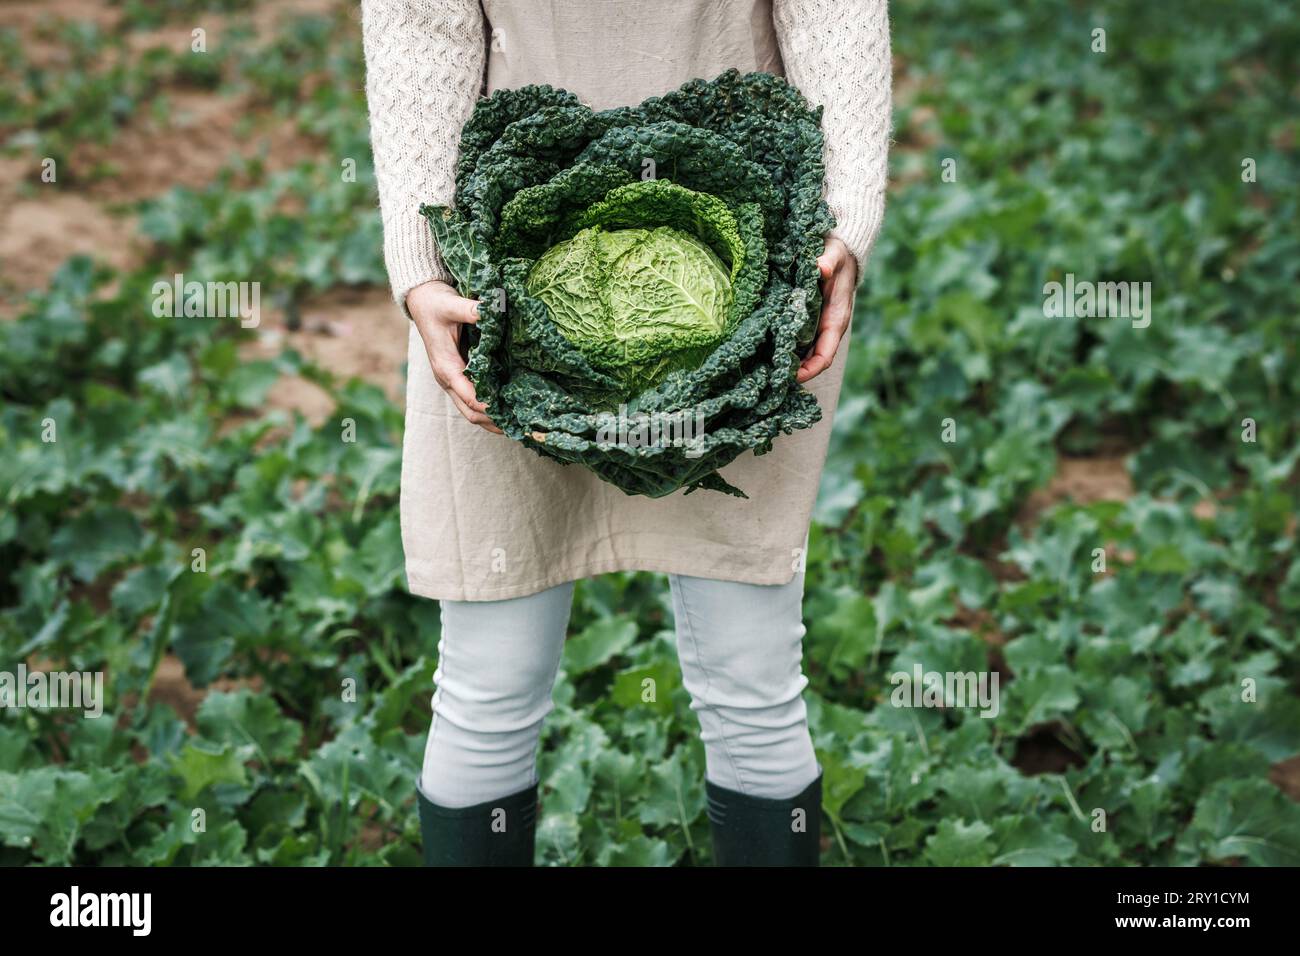 Farmer holding big kale cabbage at agricultural field. Farming and harvesting leaf vegetable in fall season. Stock Photo